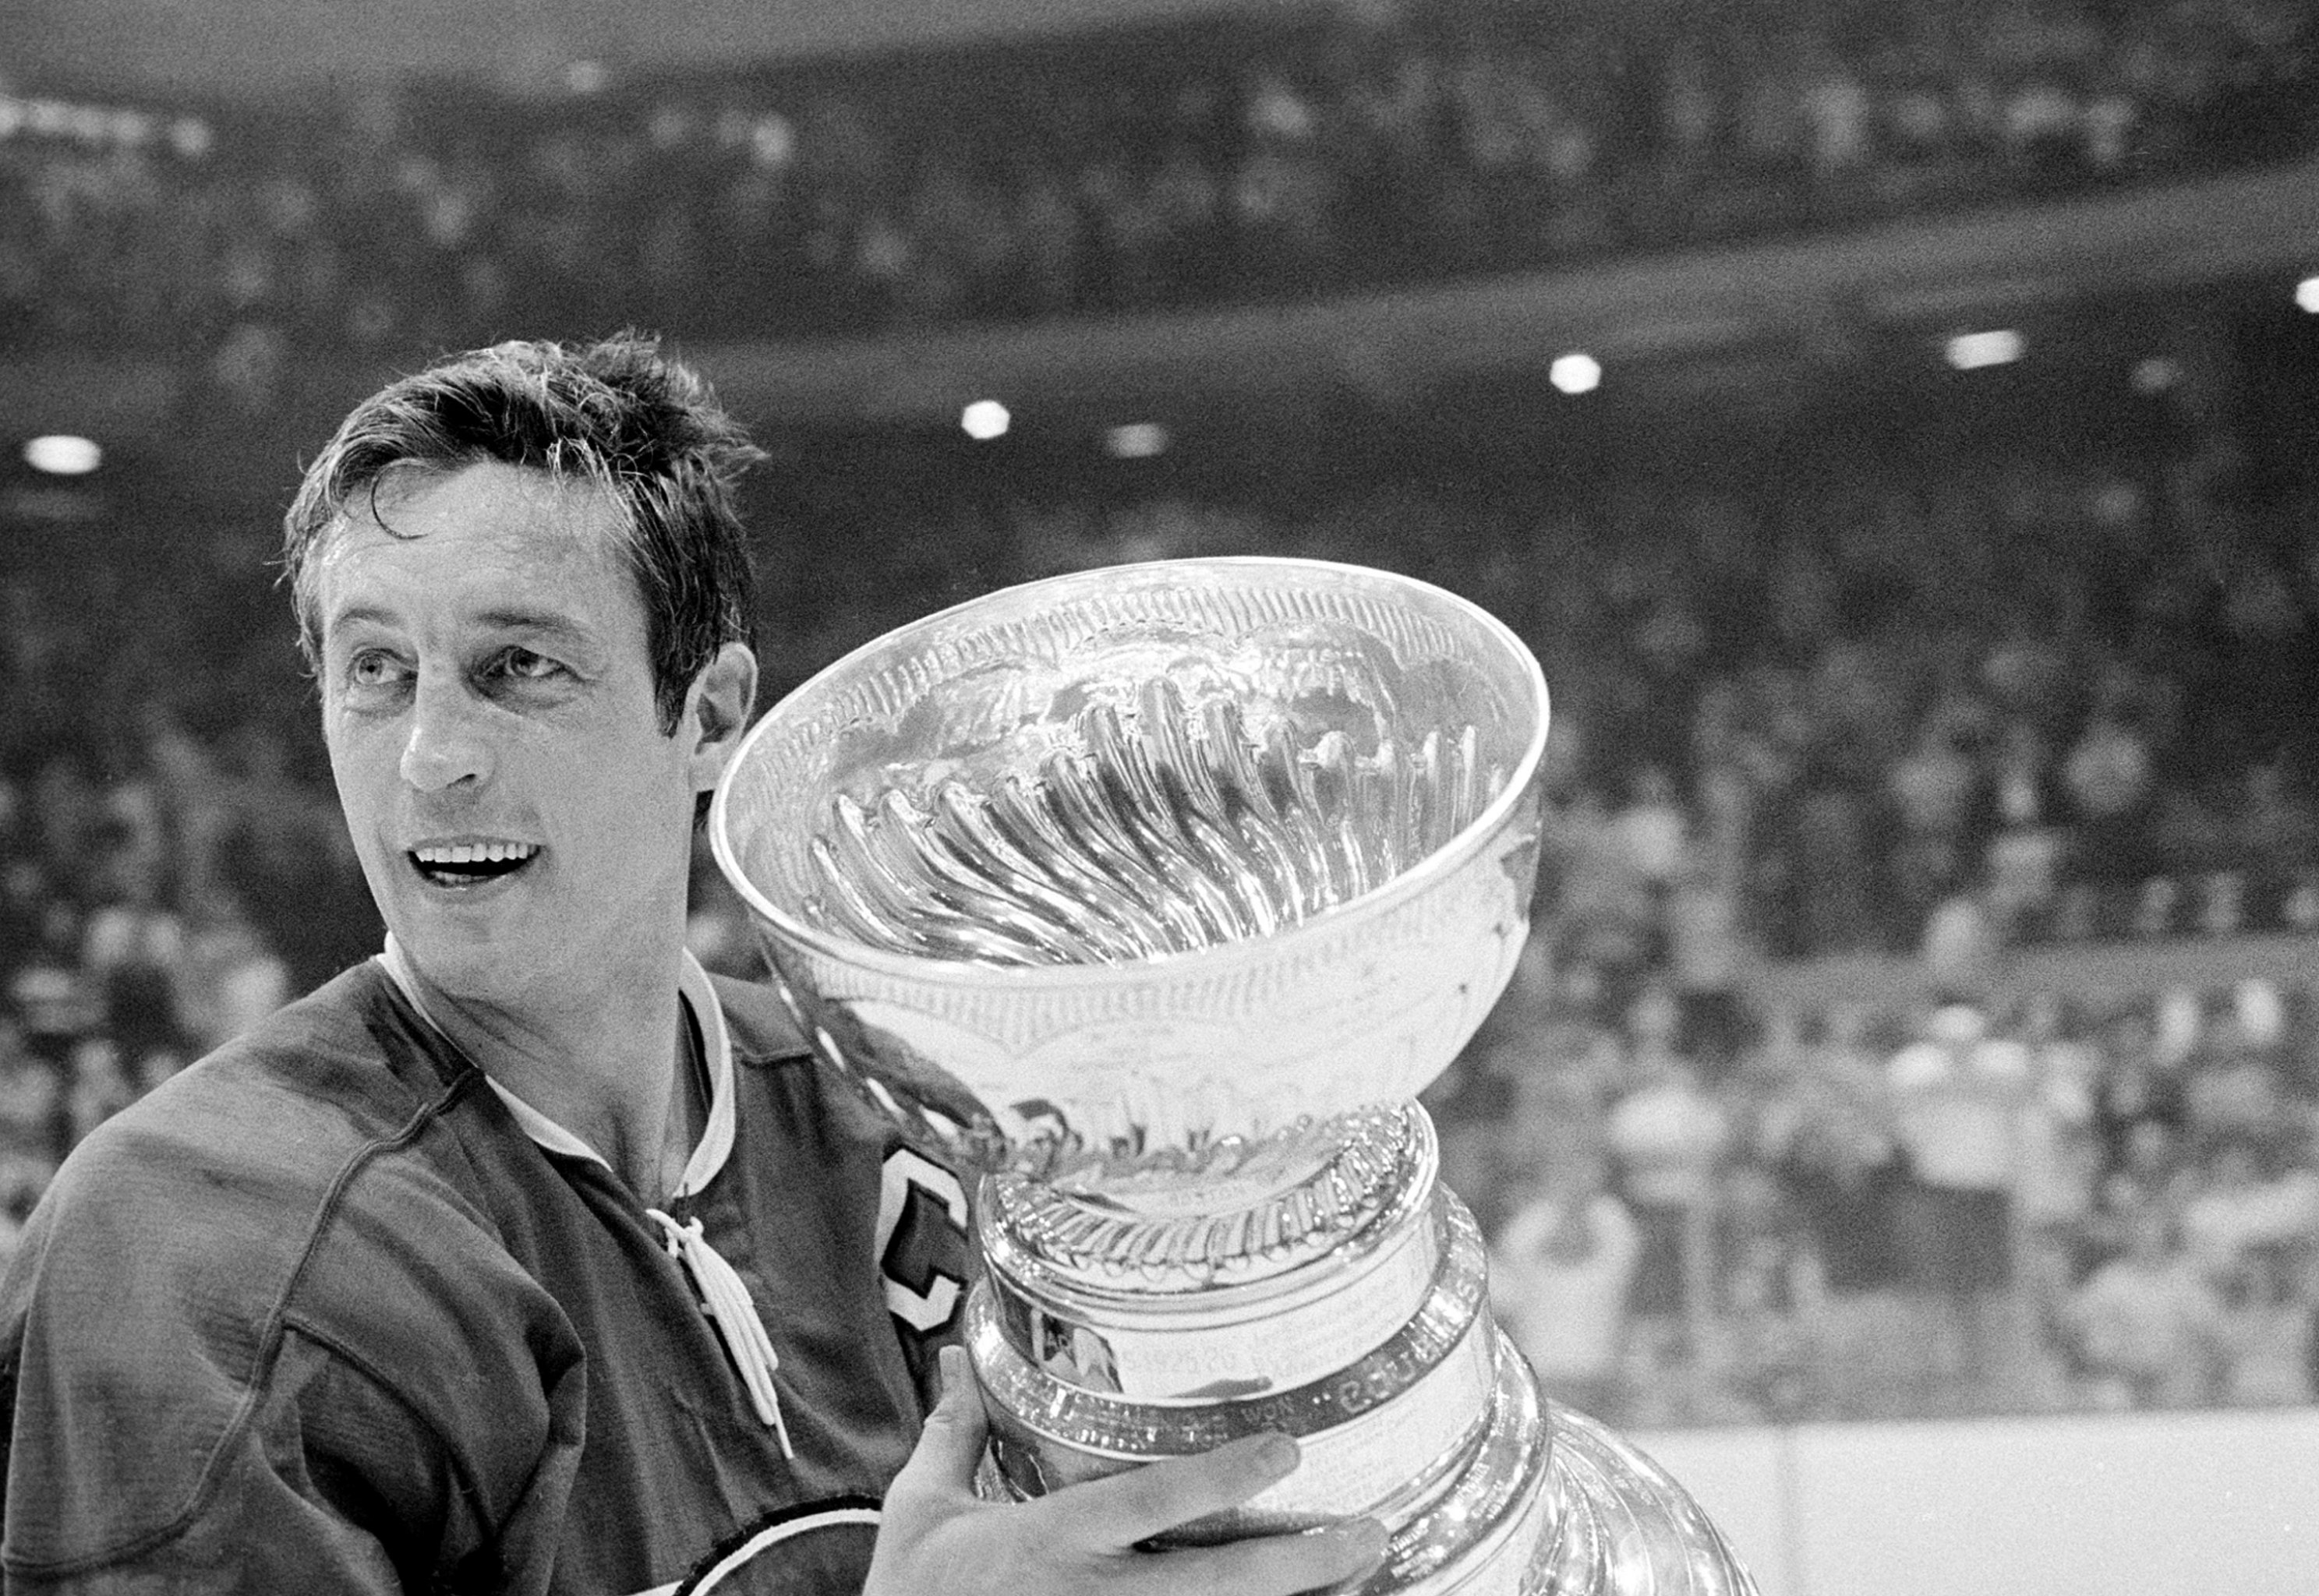 10 Best Hockey Players of All Time